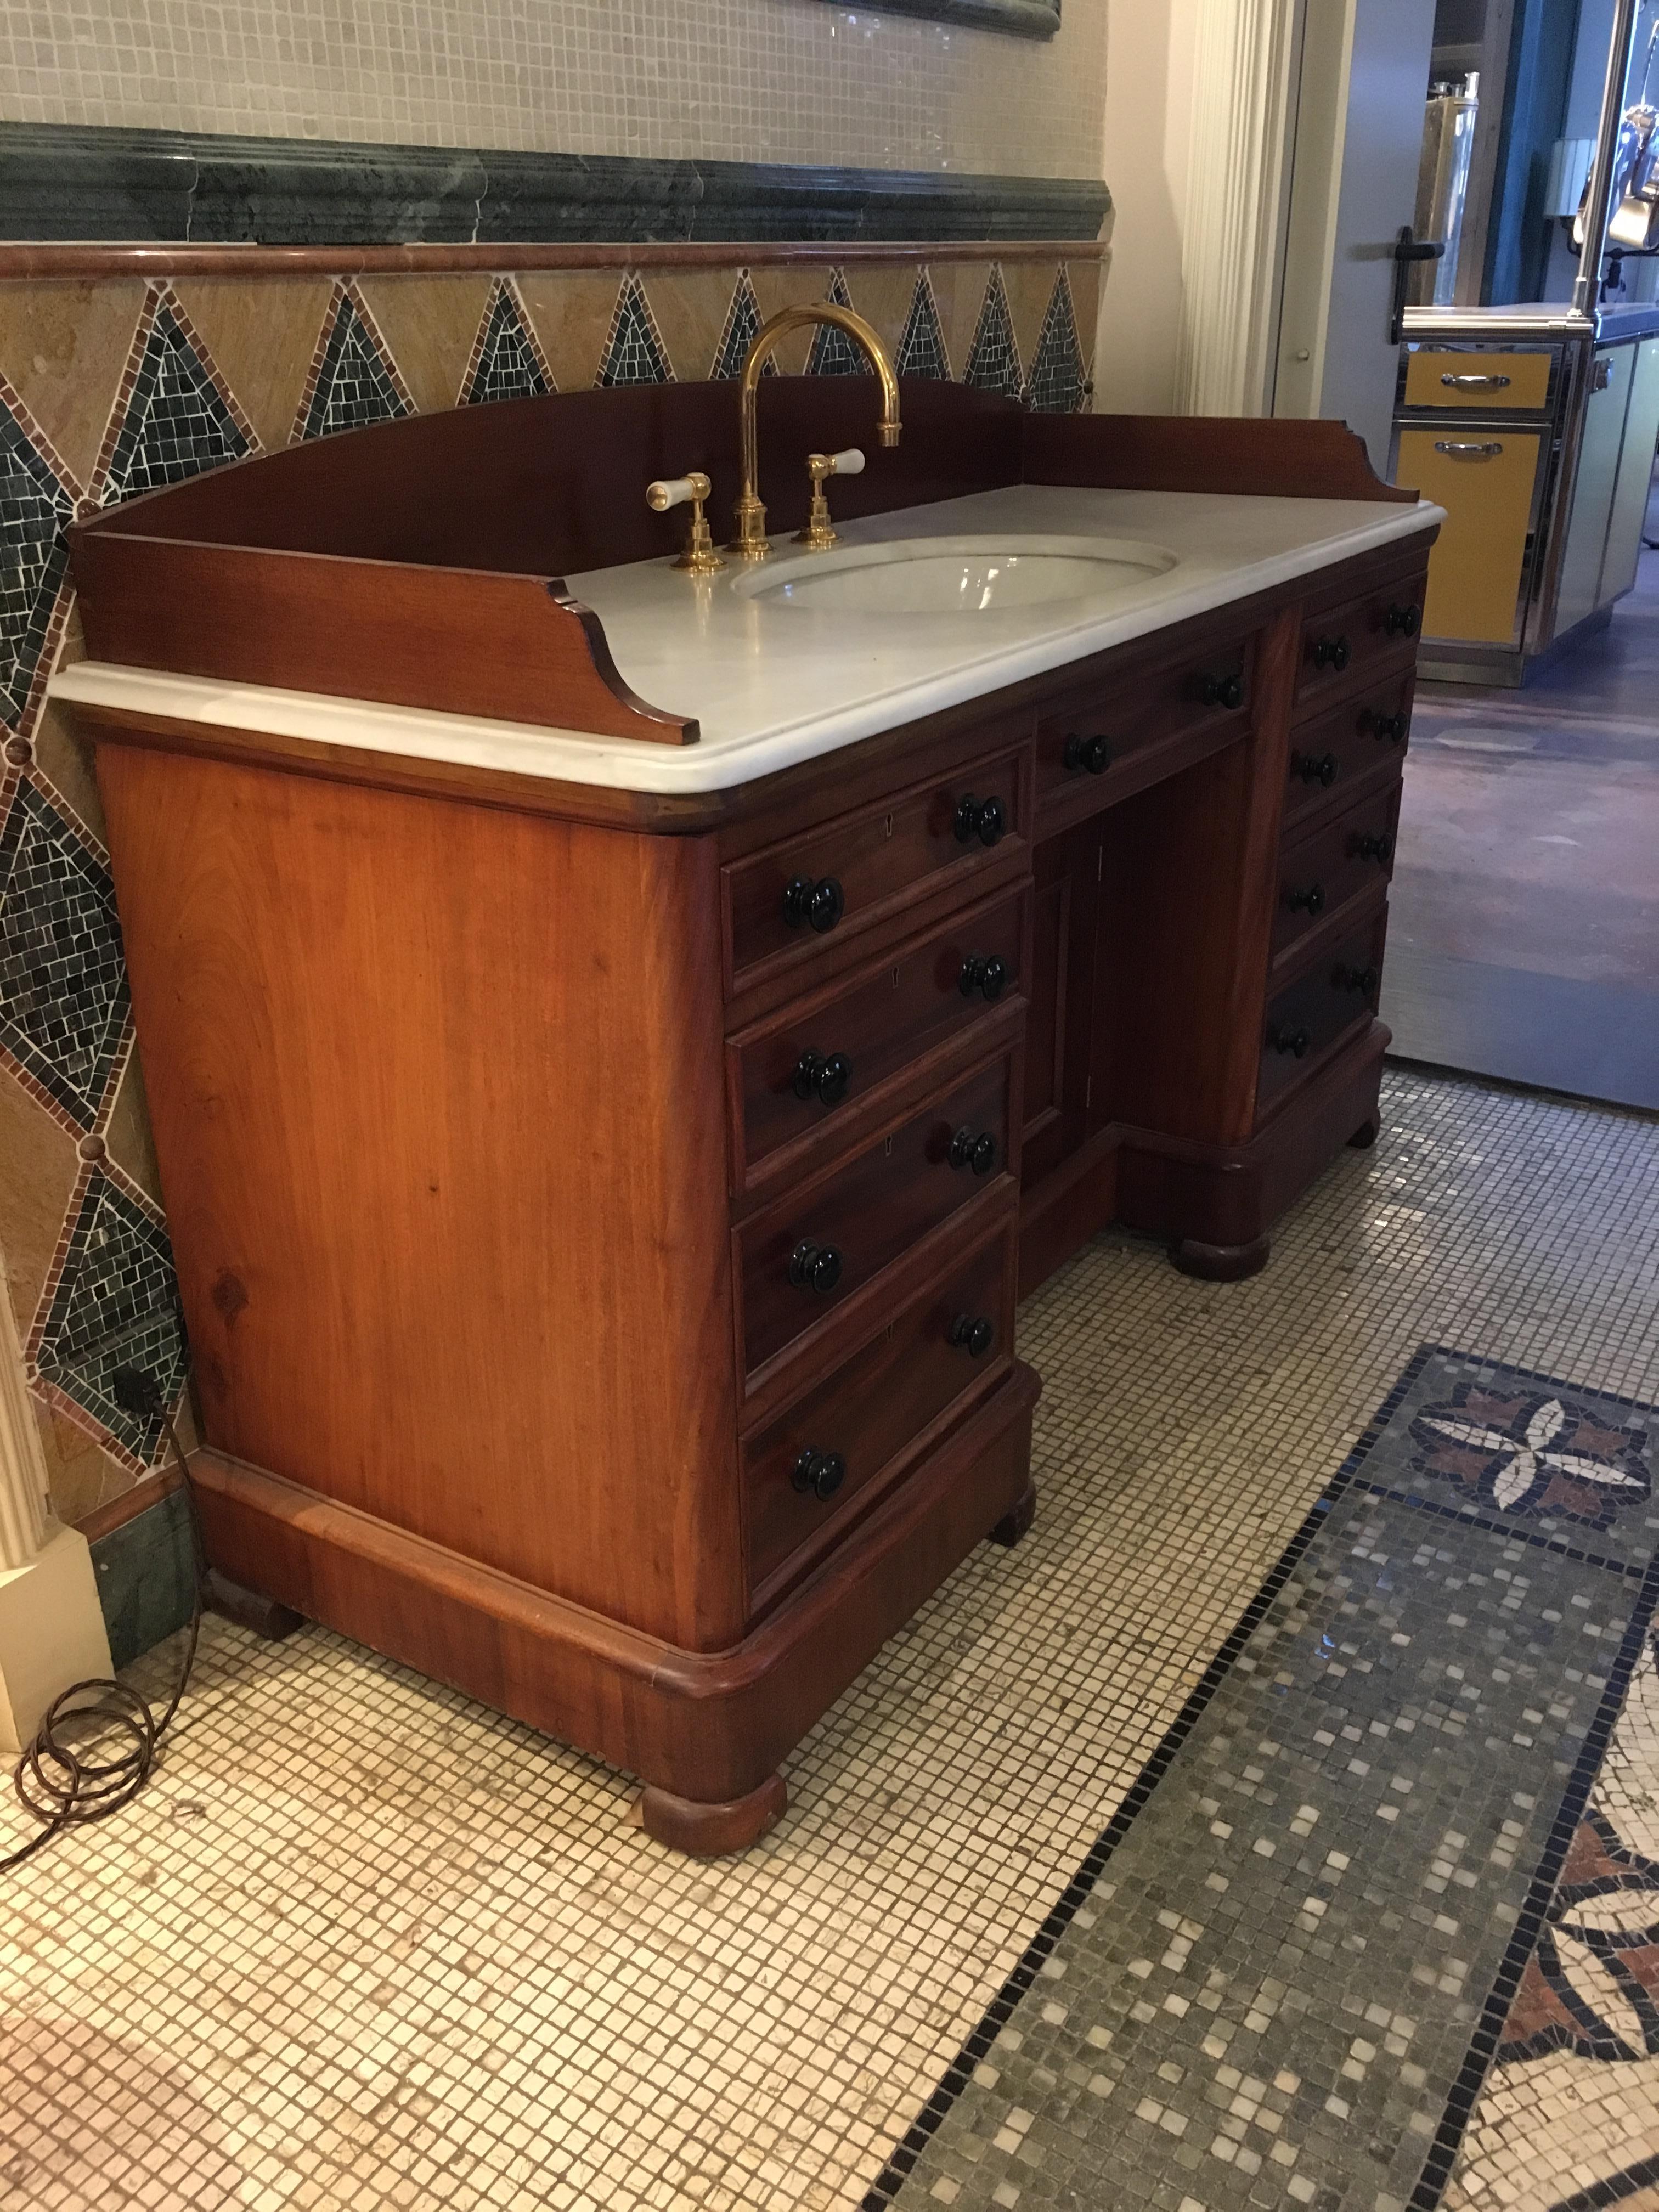 Victorian 19th Century English Mahogany Cupboard Sink with Carrara Marble Top, 1890s